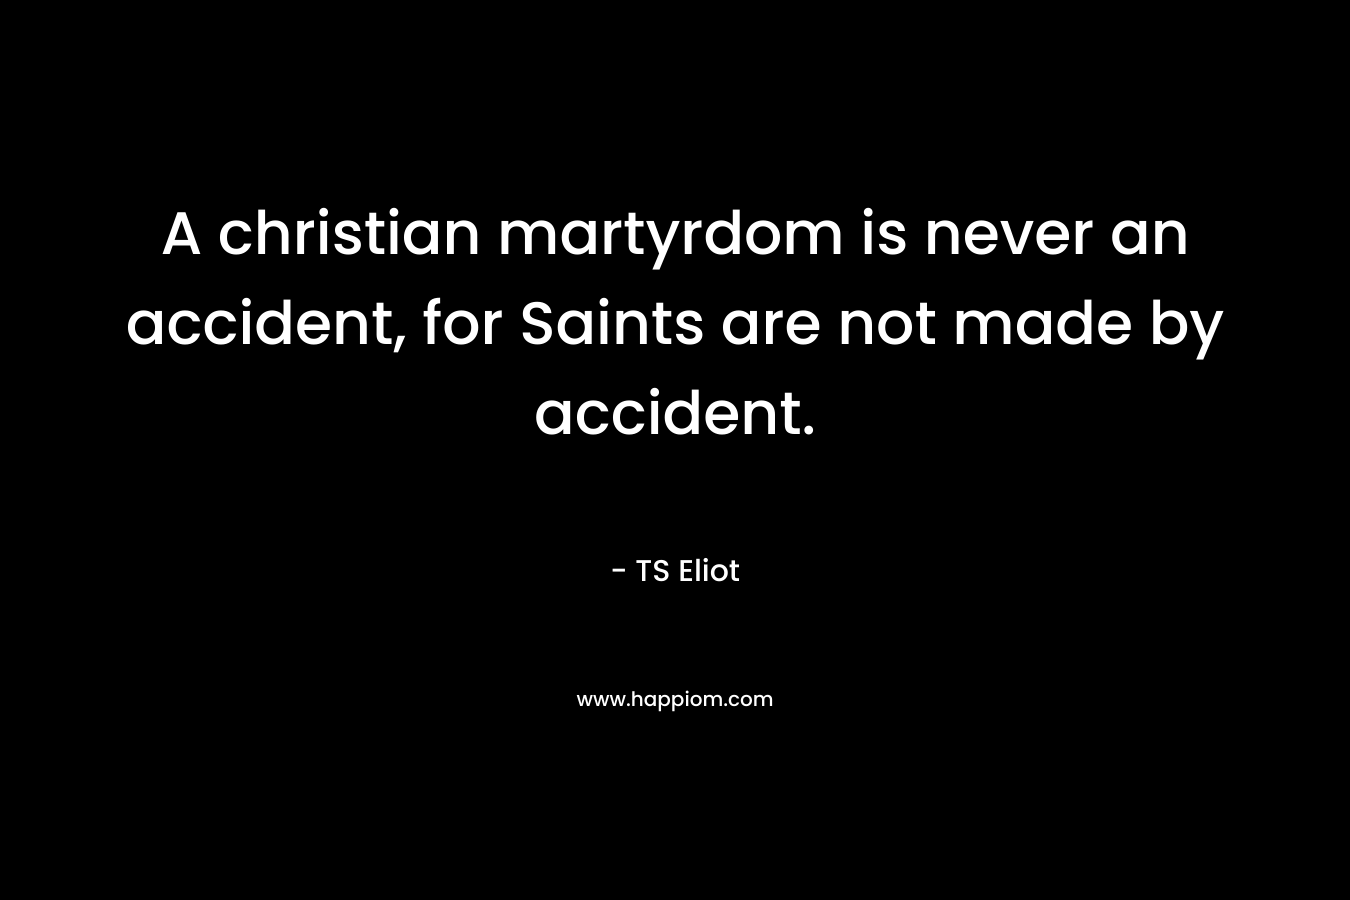 A christian martyrdom is never an accident, for Saints are not made by accident.